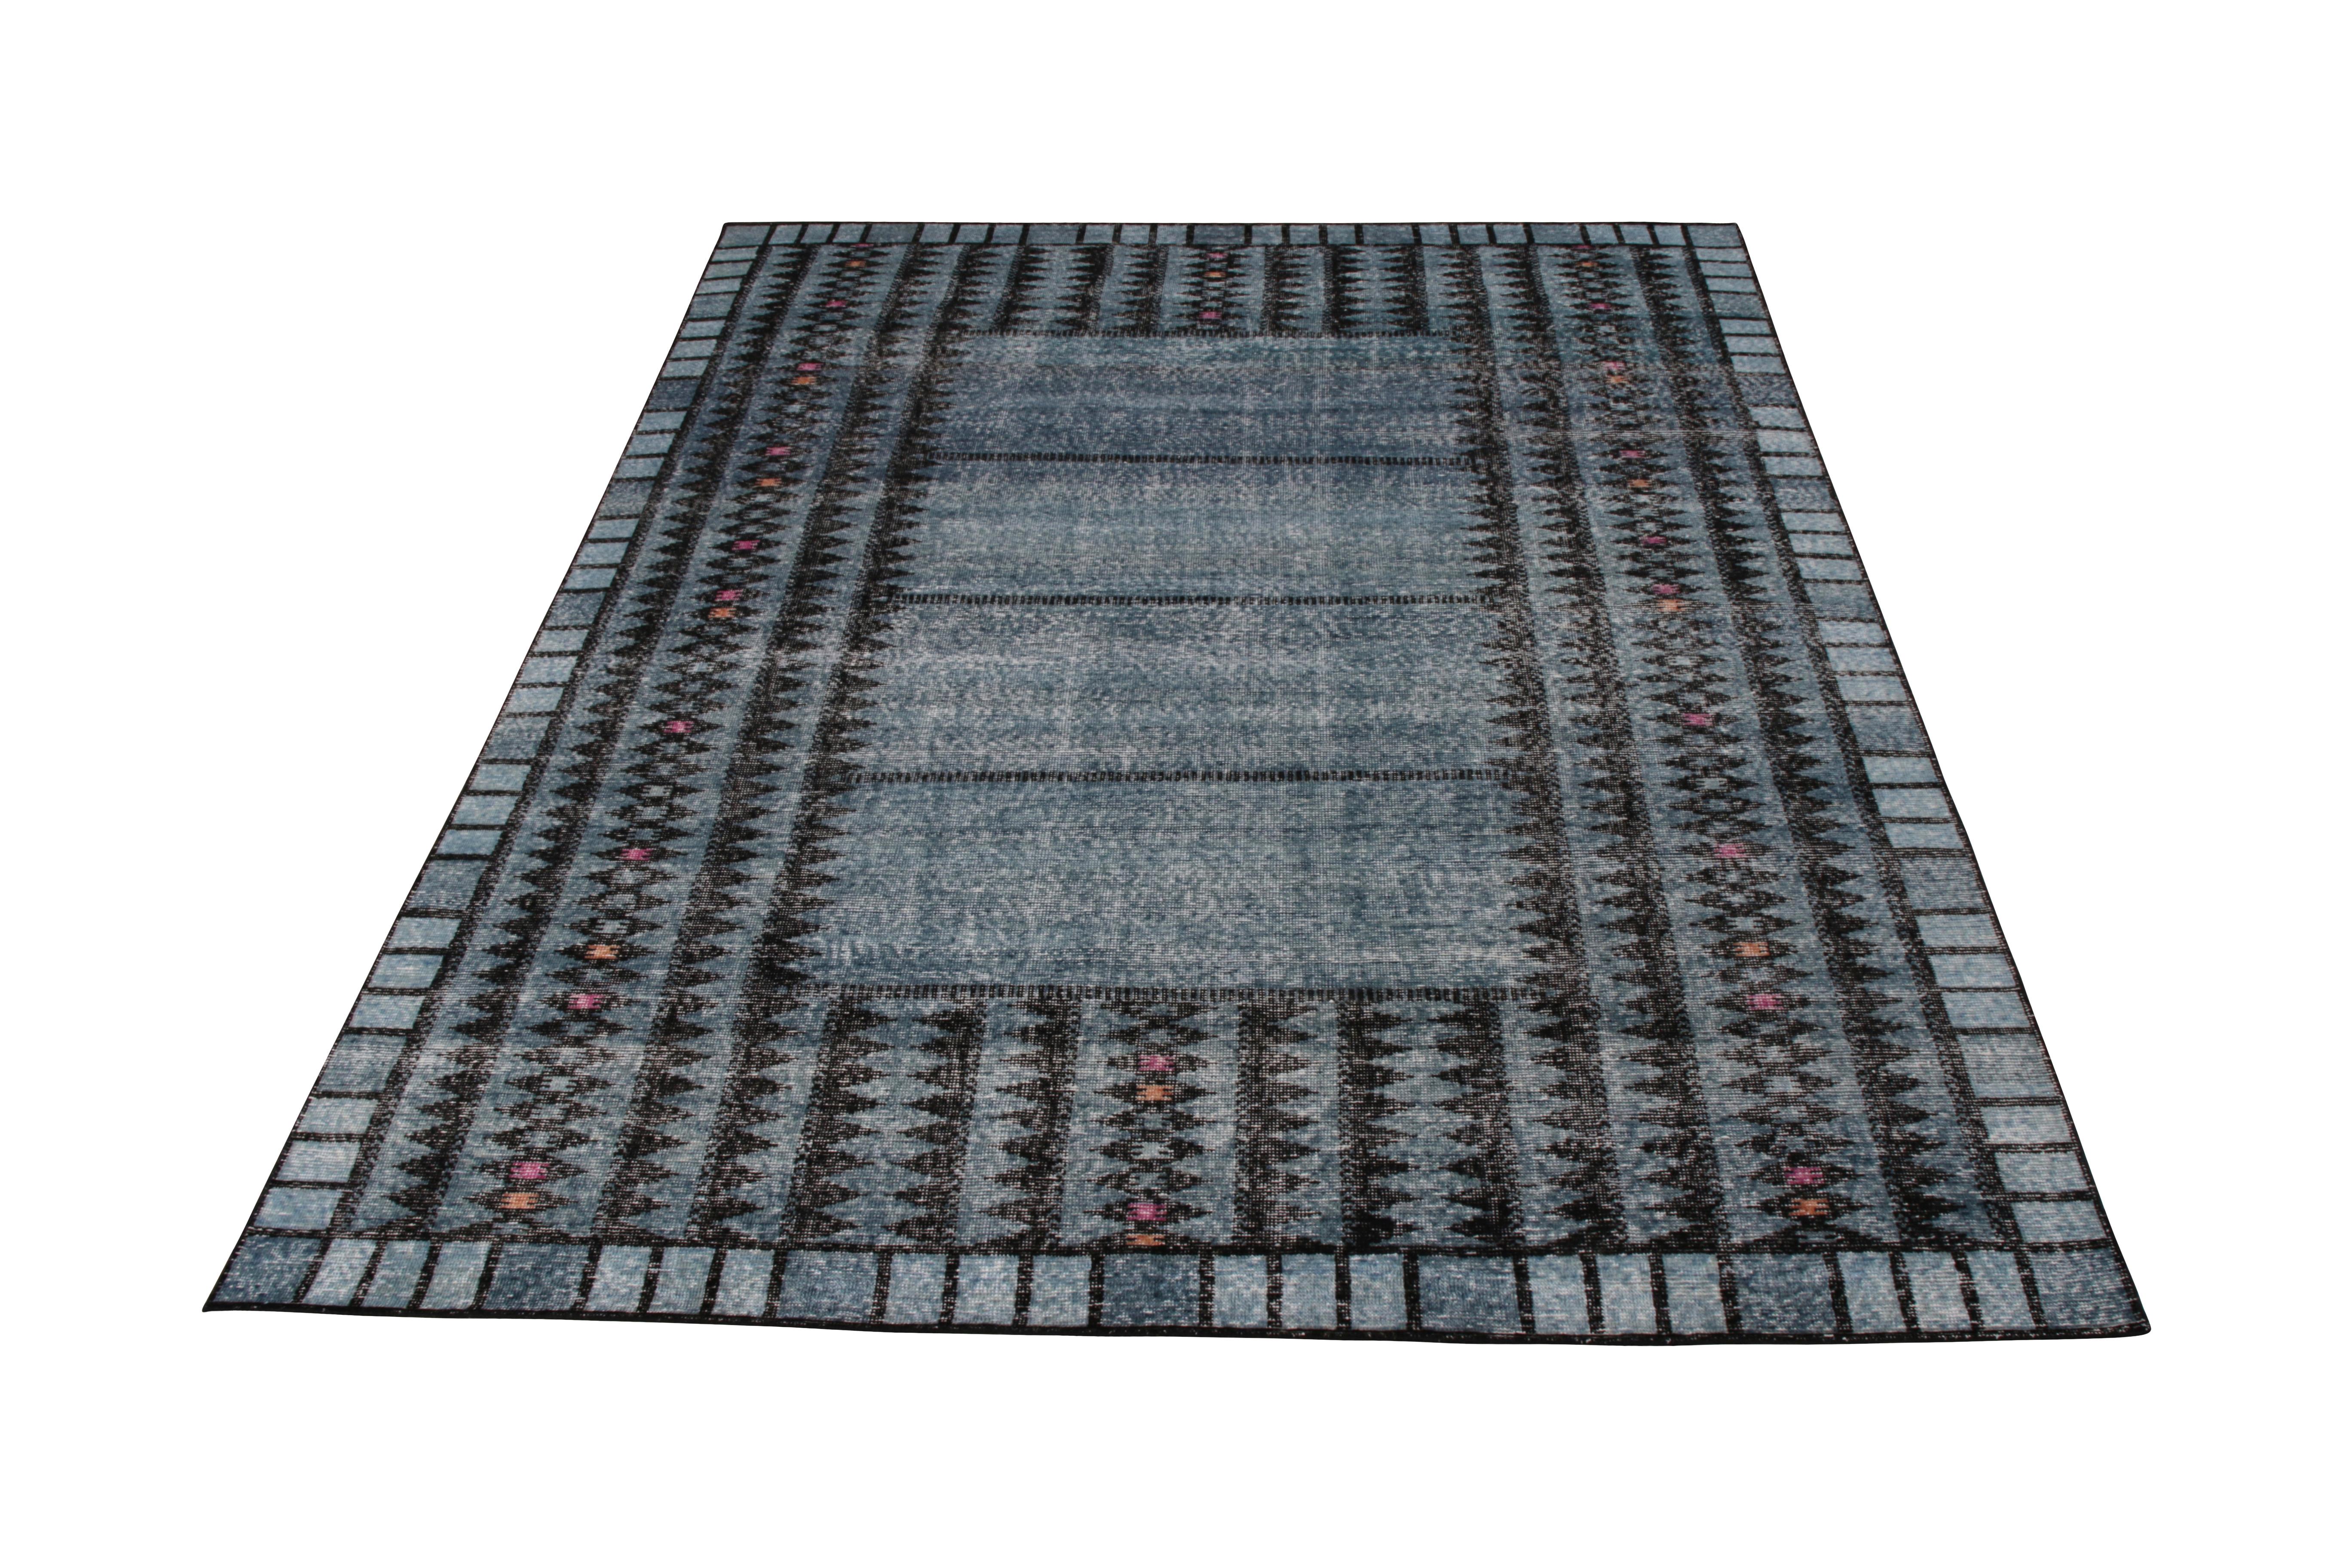 Handmade in a refined, low-pile wool with a comfortable wash achieving this shabby-chic distressed style, this 8 x 10 Scandinavian rug joins the Homage Collection by Rug & Kilim, representing an encyclopedic approach to reimagining iconic classic